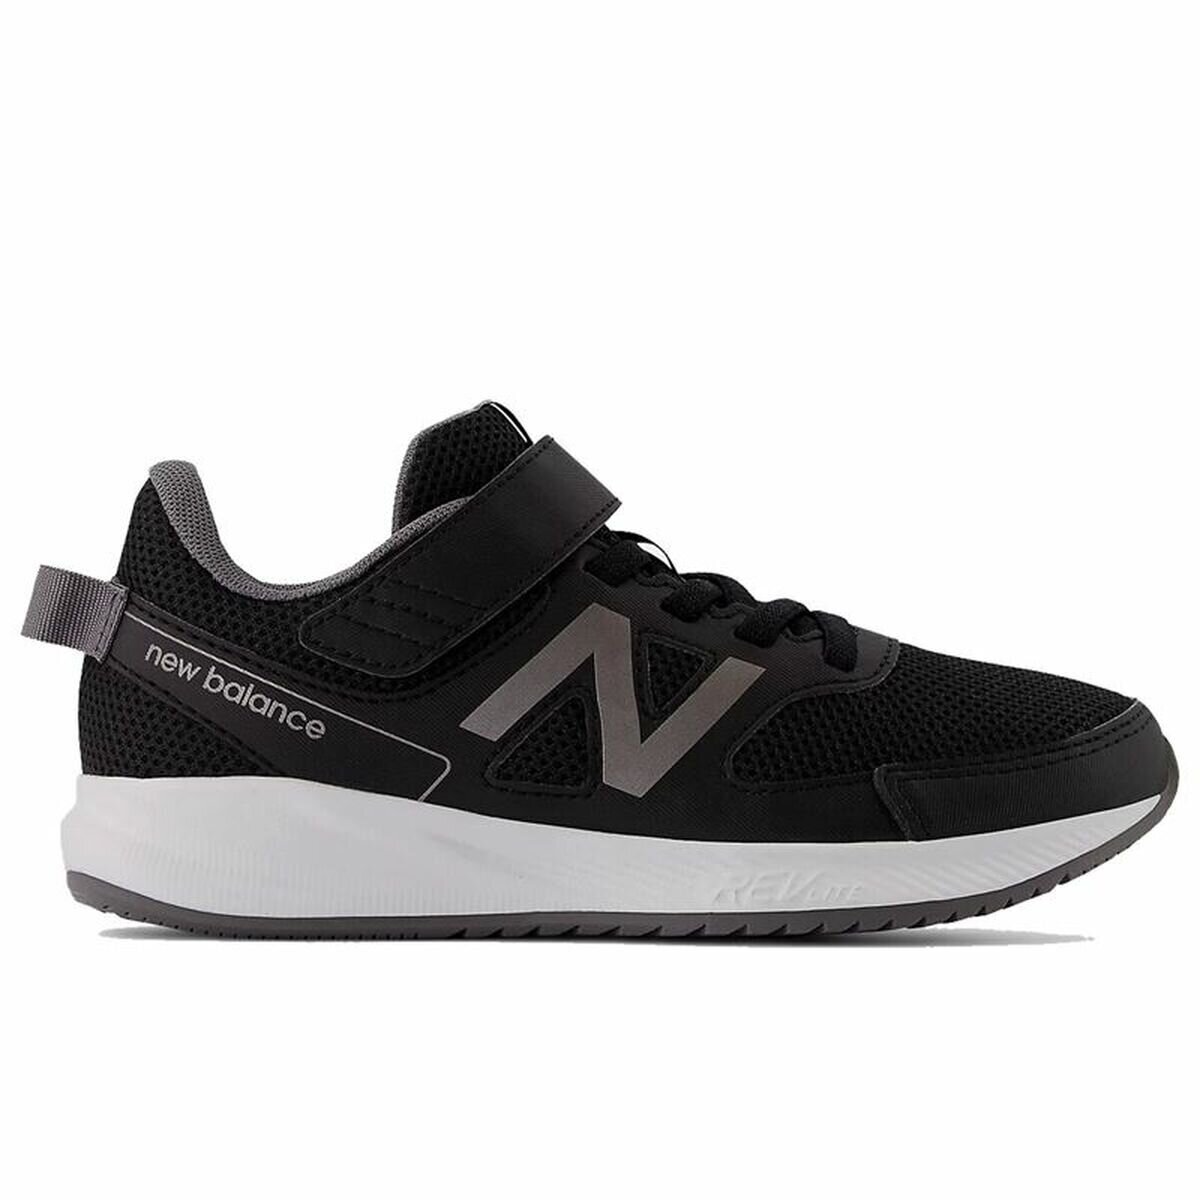 Children's Casual Trainers New Balance 570v3 Black